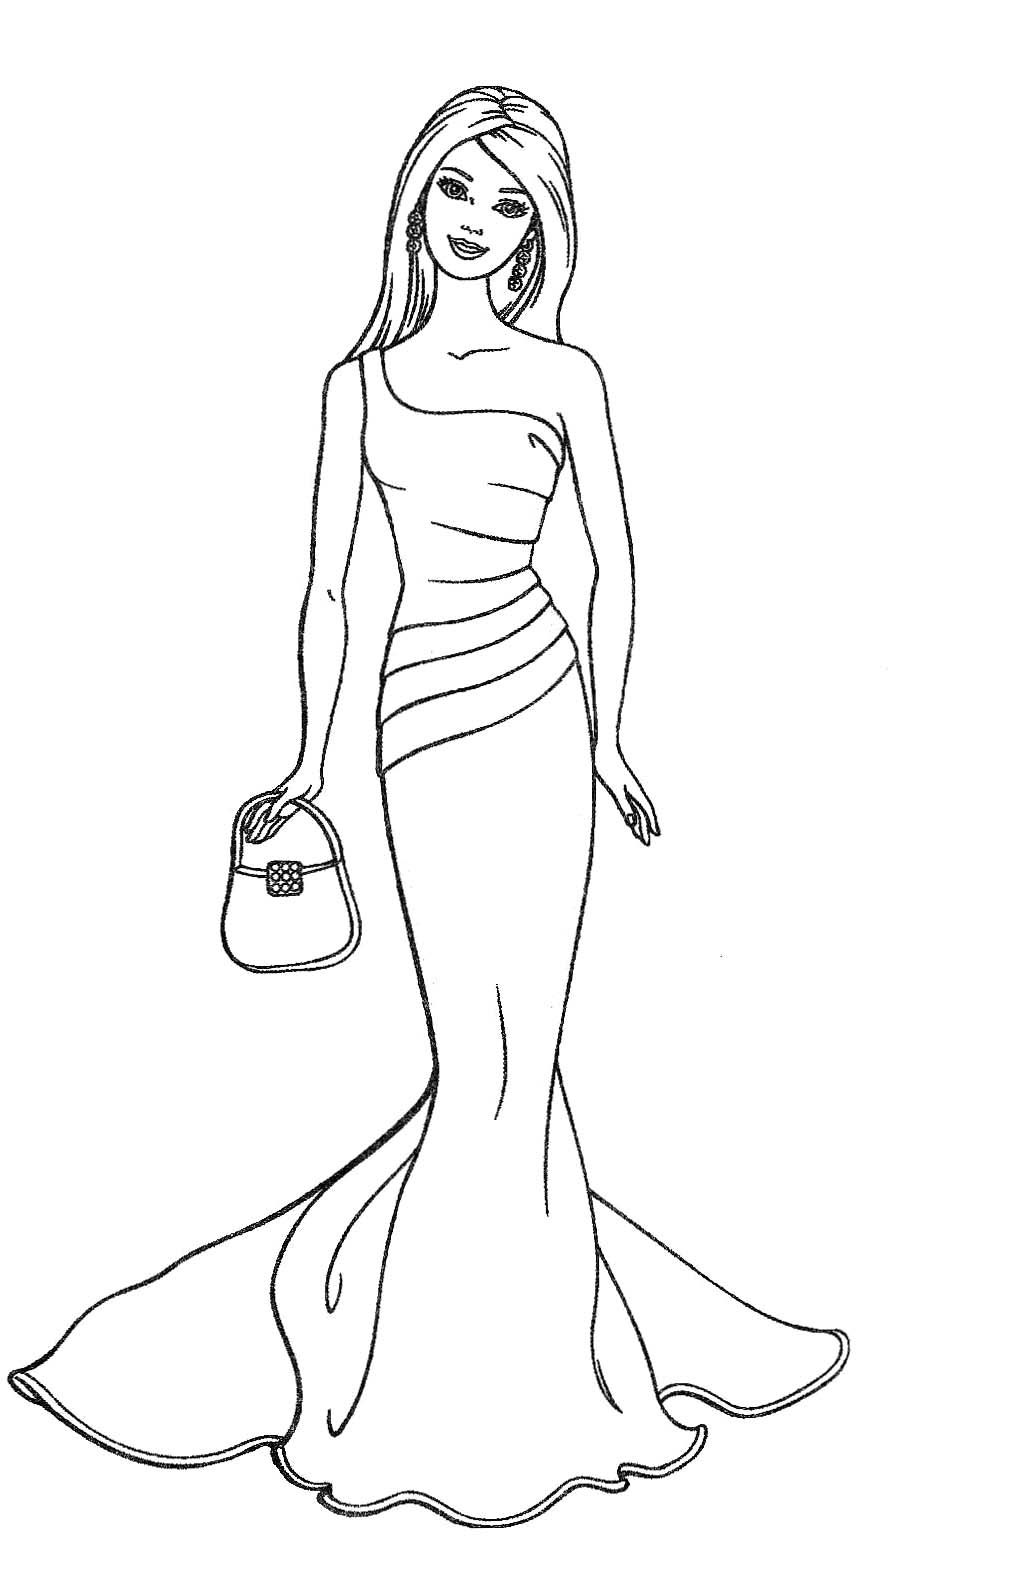 Download Barbie Coloring Pages Printable To Download